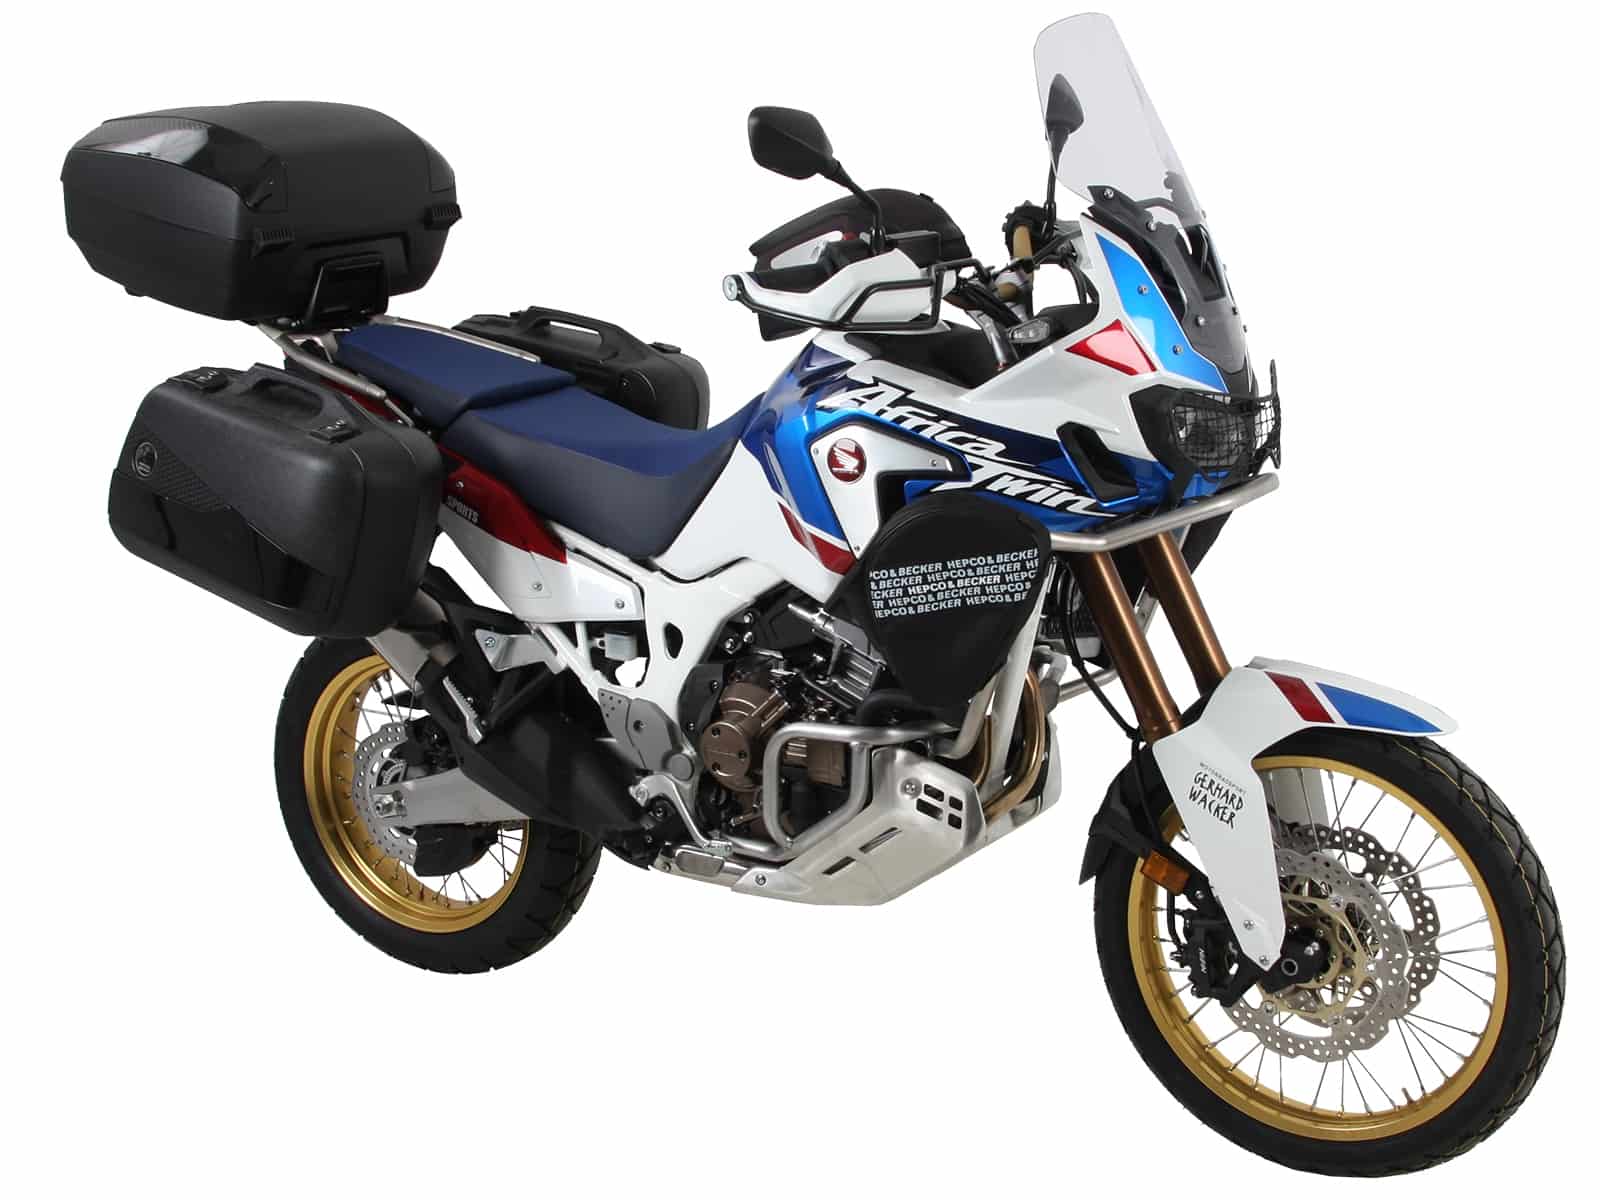 Sidecarrier permanent mounted black for Honda CRF1000L Africa Twin Adventure Sports (2018-2019)